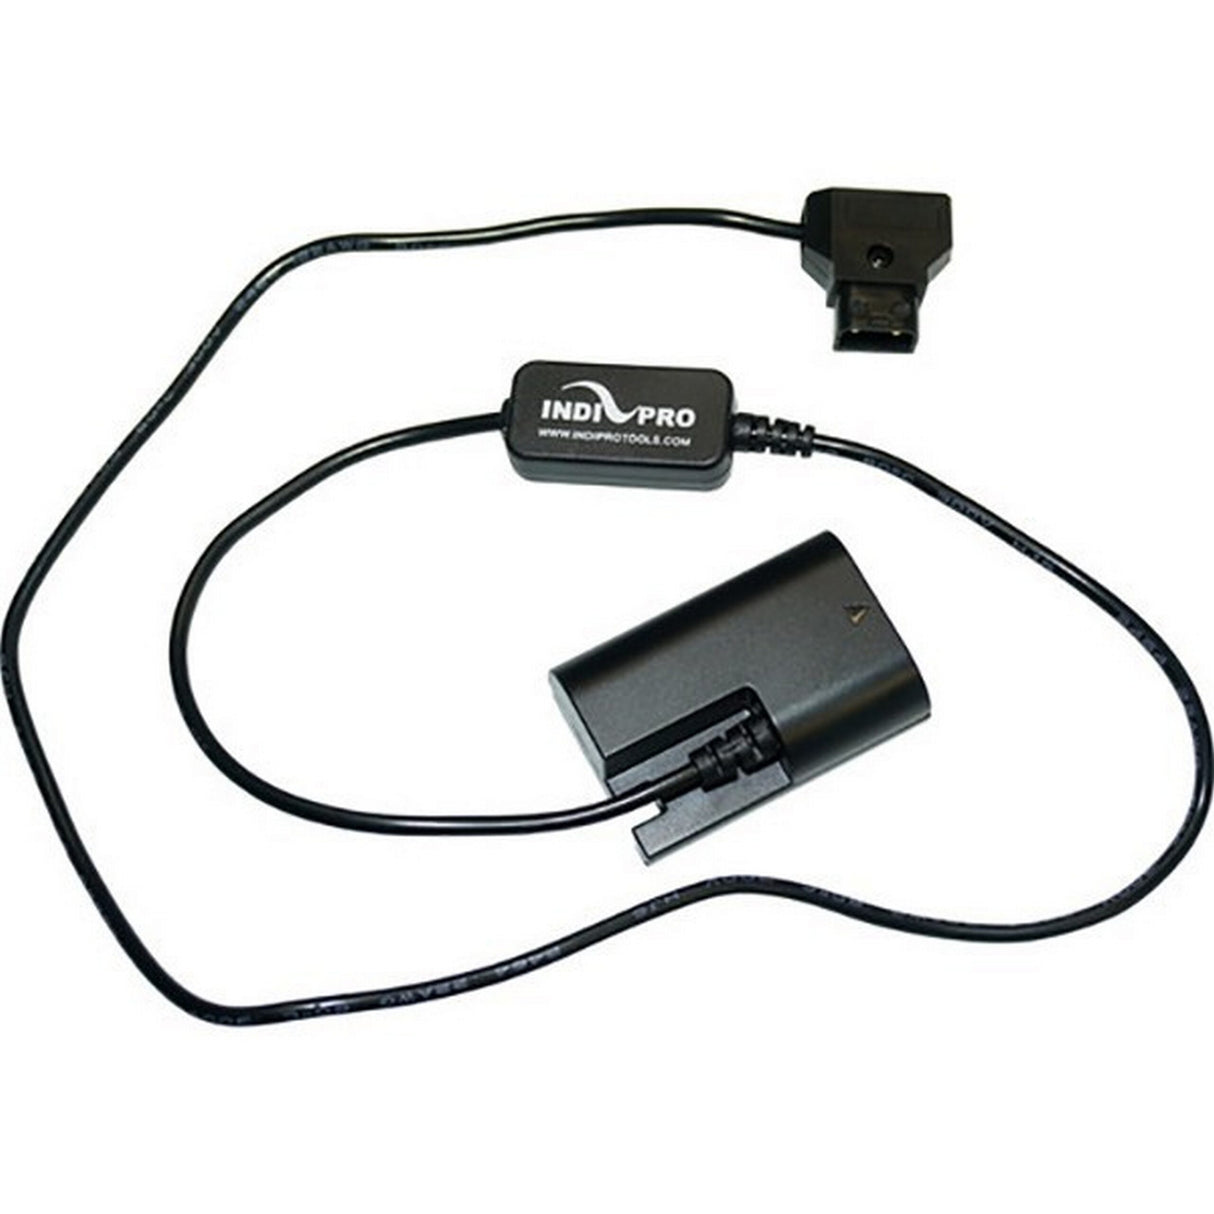 IndiPRO SHPTE6 Power Converter D-Tap to Canon LP-E6 Dummy Battery for SmallHD Monitors, 30-Inch